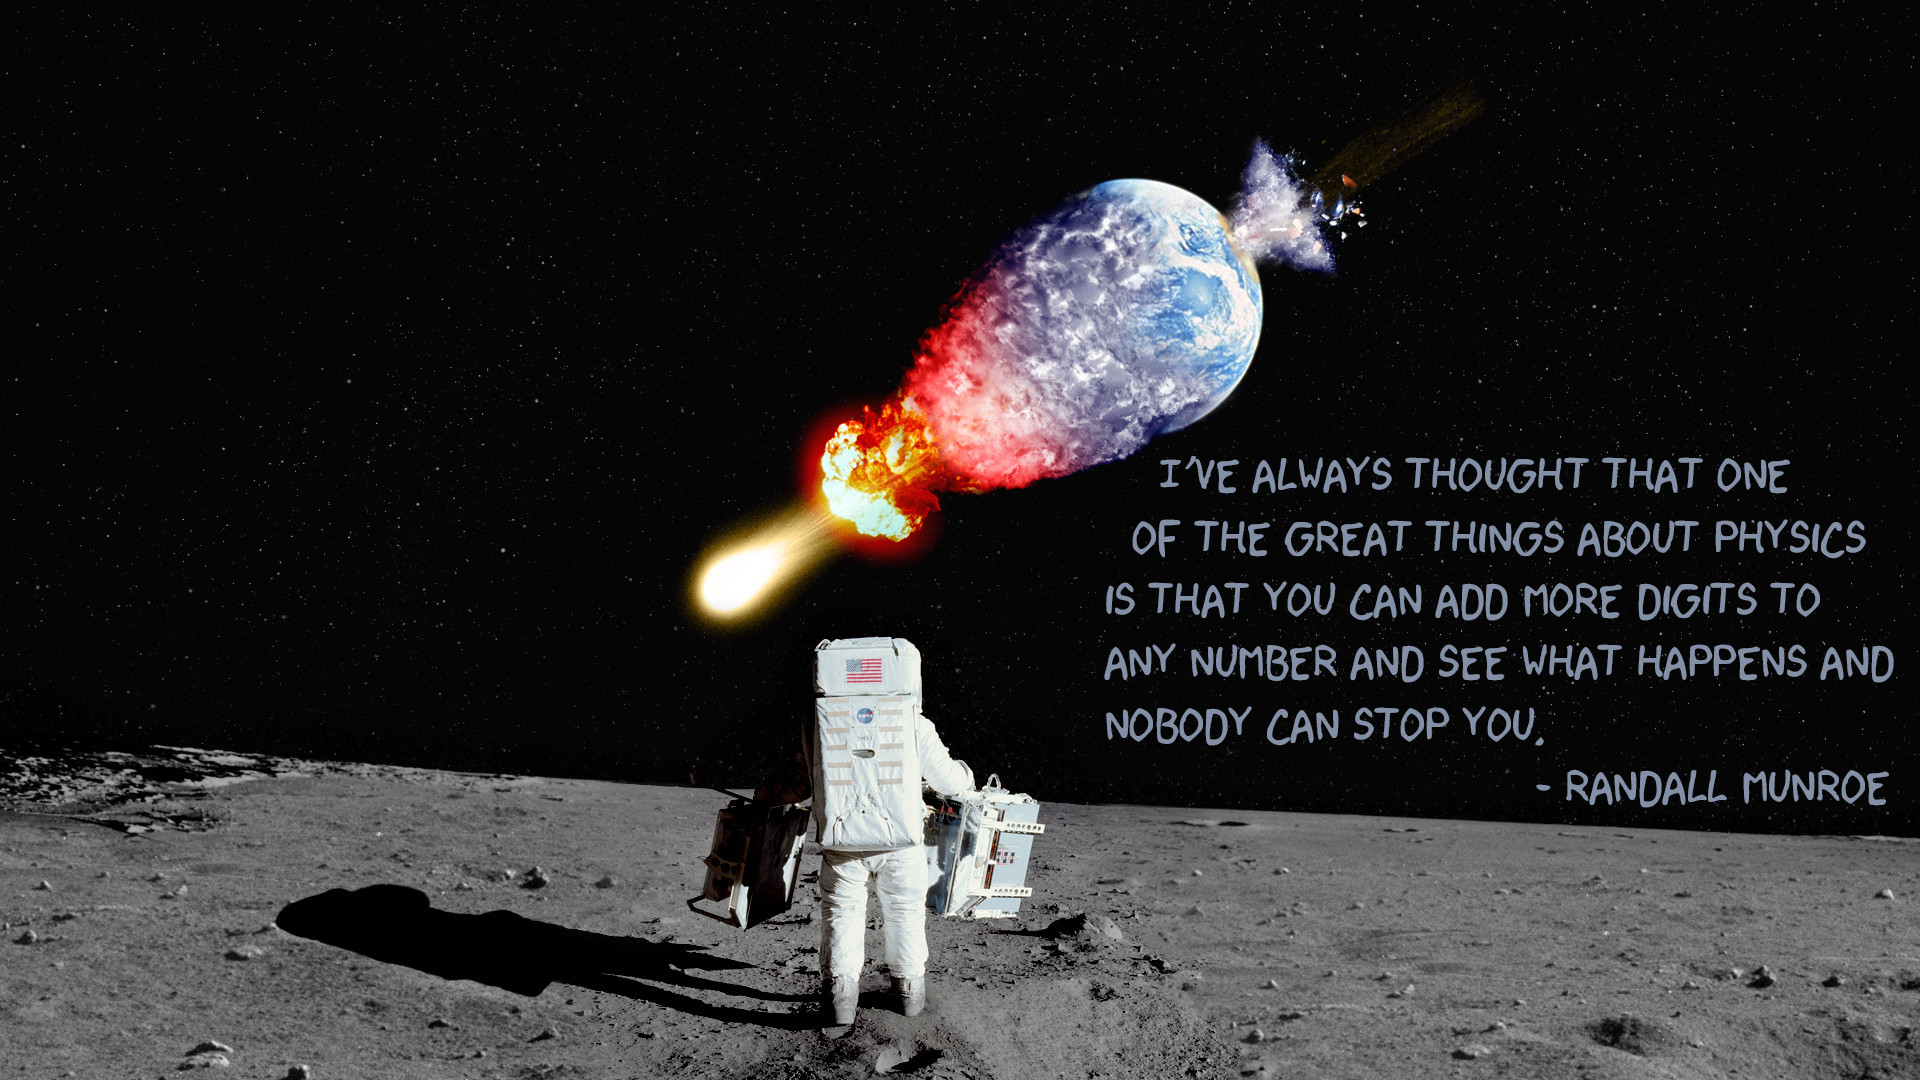 randall, Munroe, Astronaut, Earth, Asteroid, Comet, Explosion, Physics, Digit Wallpaper